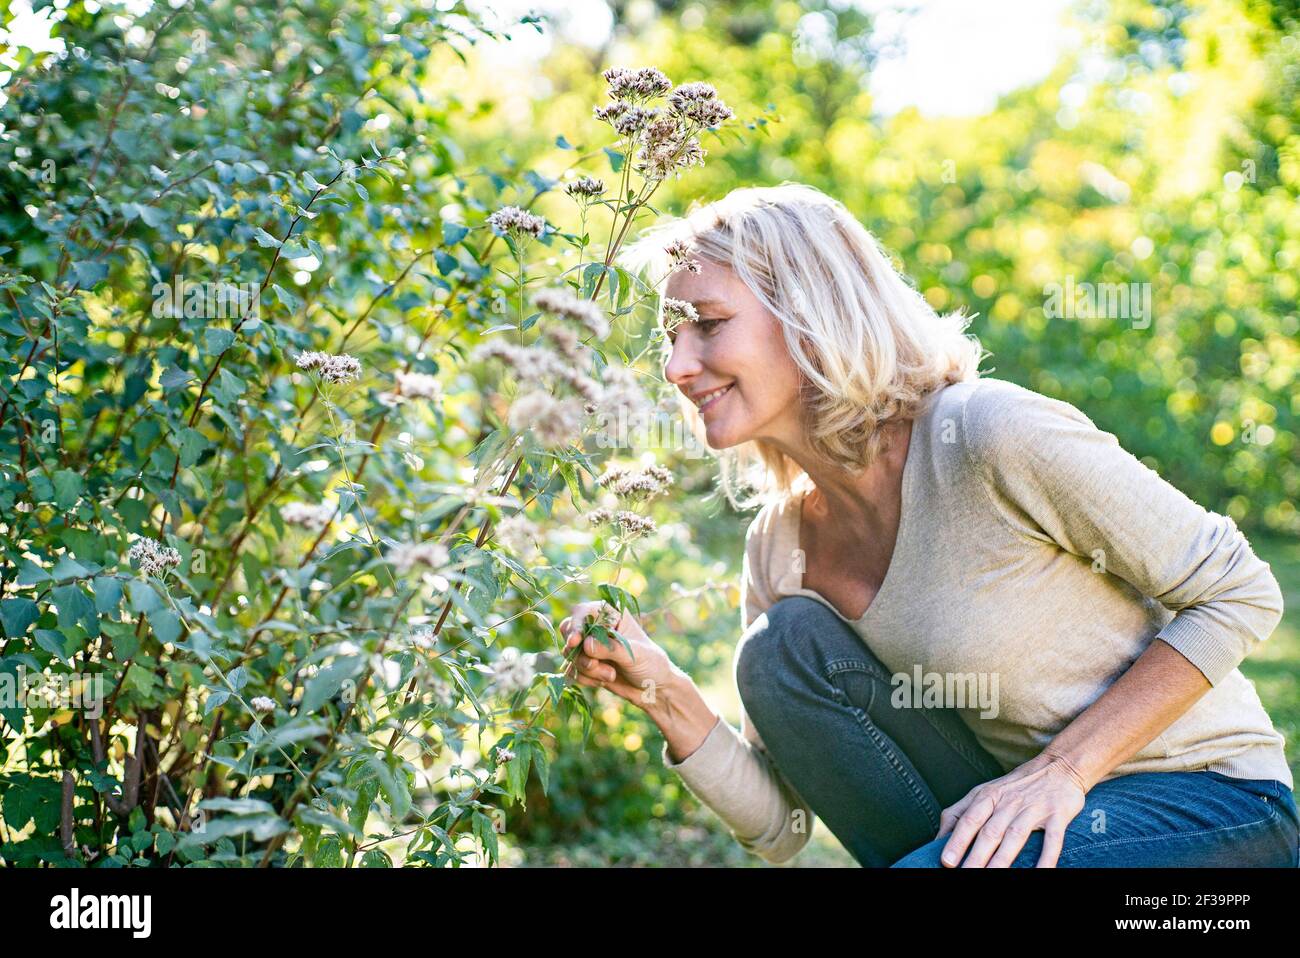 Smiling mature woman looking at plants in backyard Stock Photo